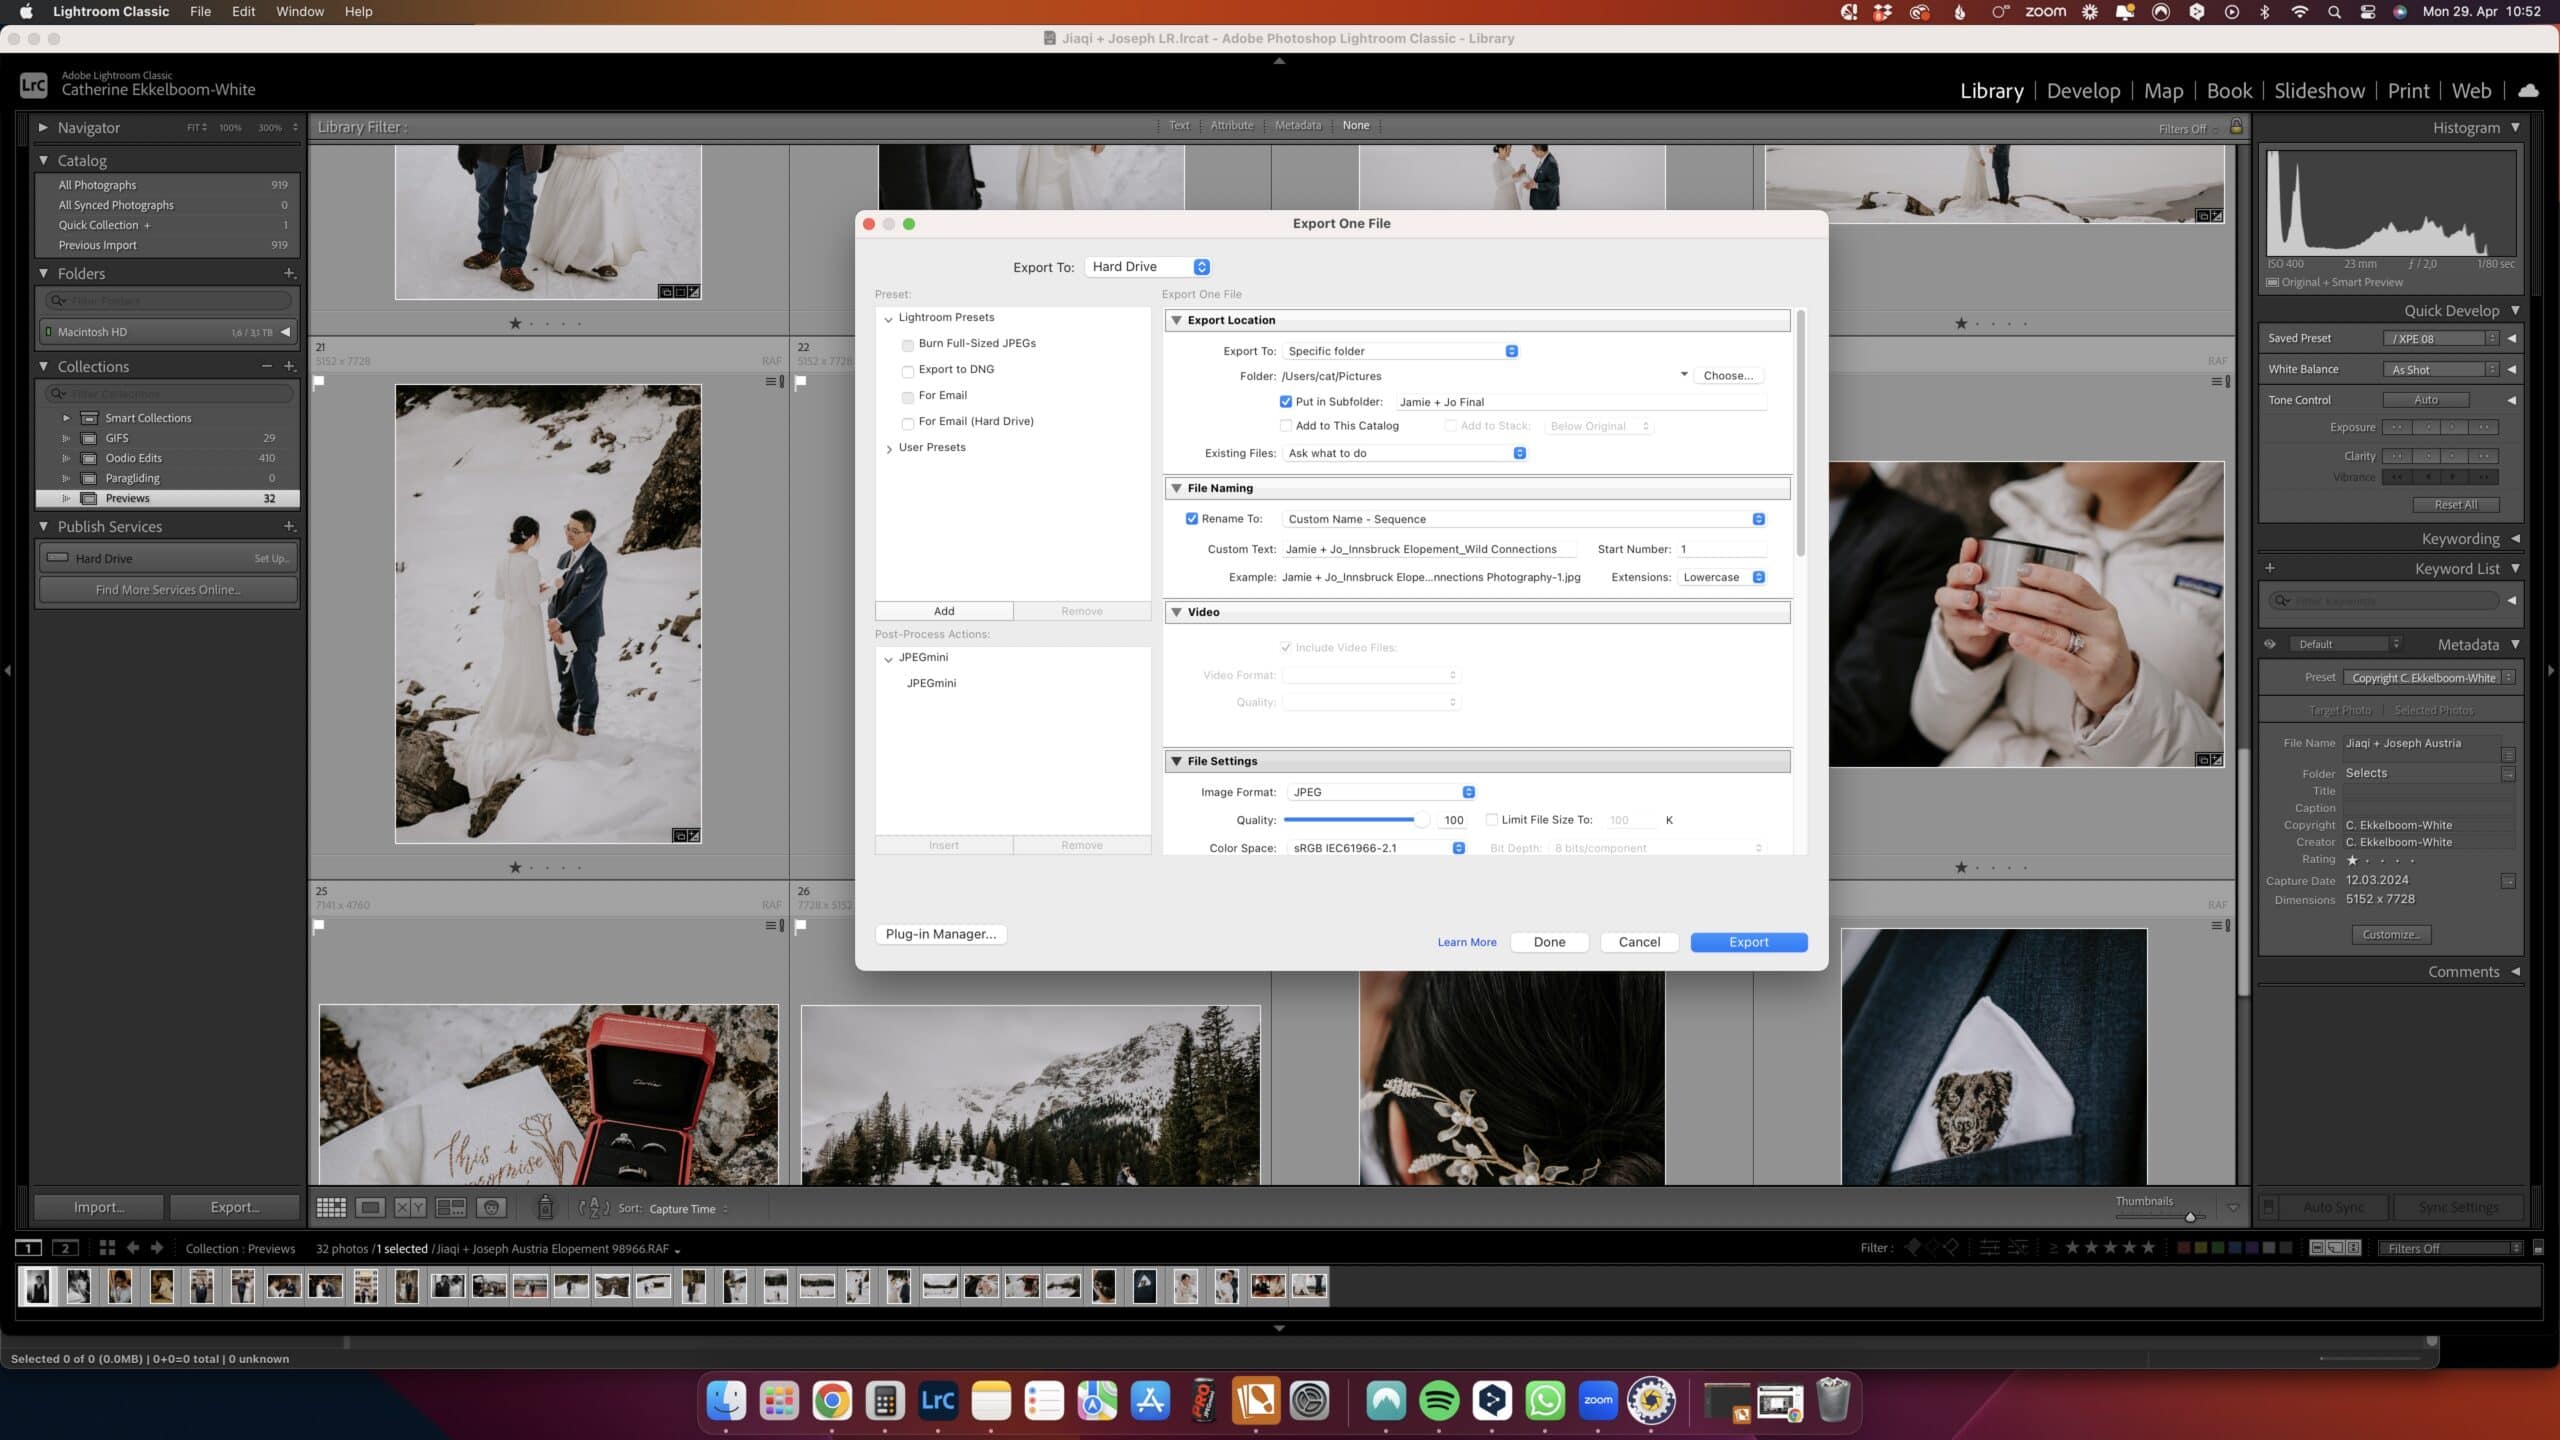 screenshot of Lightroom to show example of how to name images on export